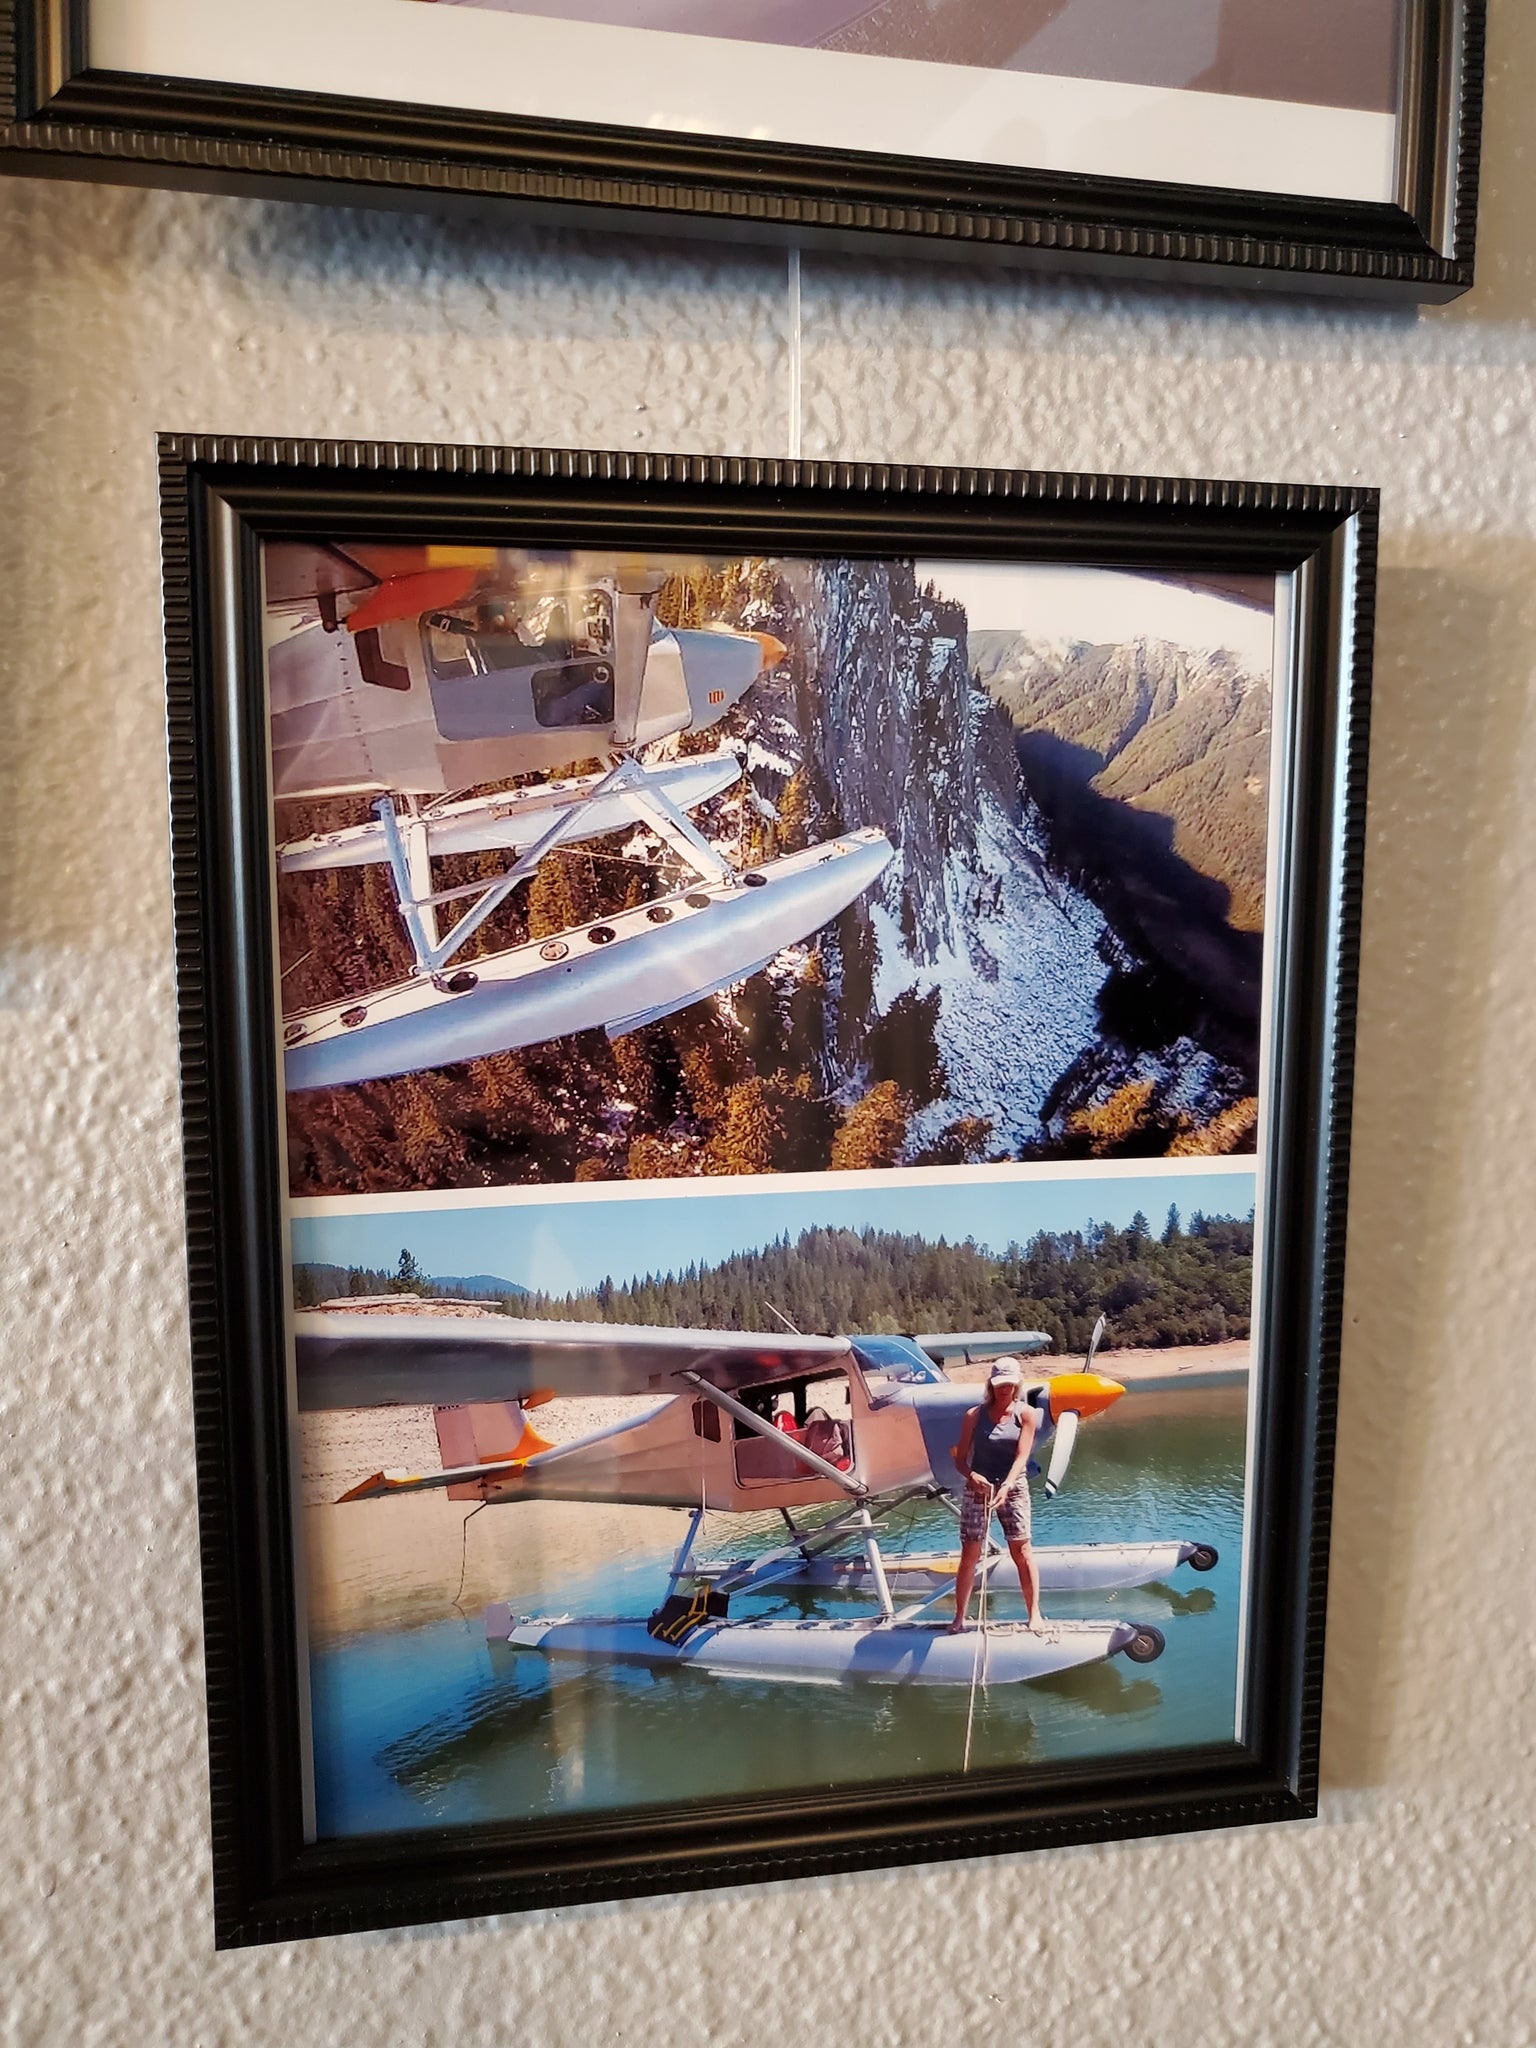 Plane photos of the owners of Old Shasta Coffee Company